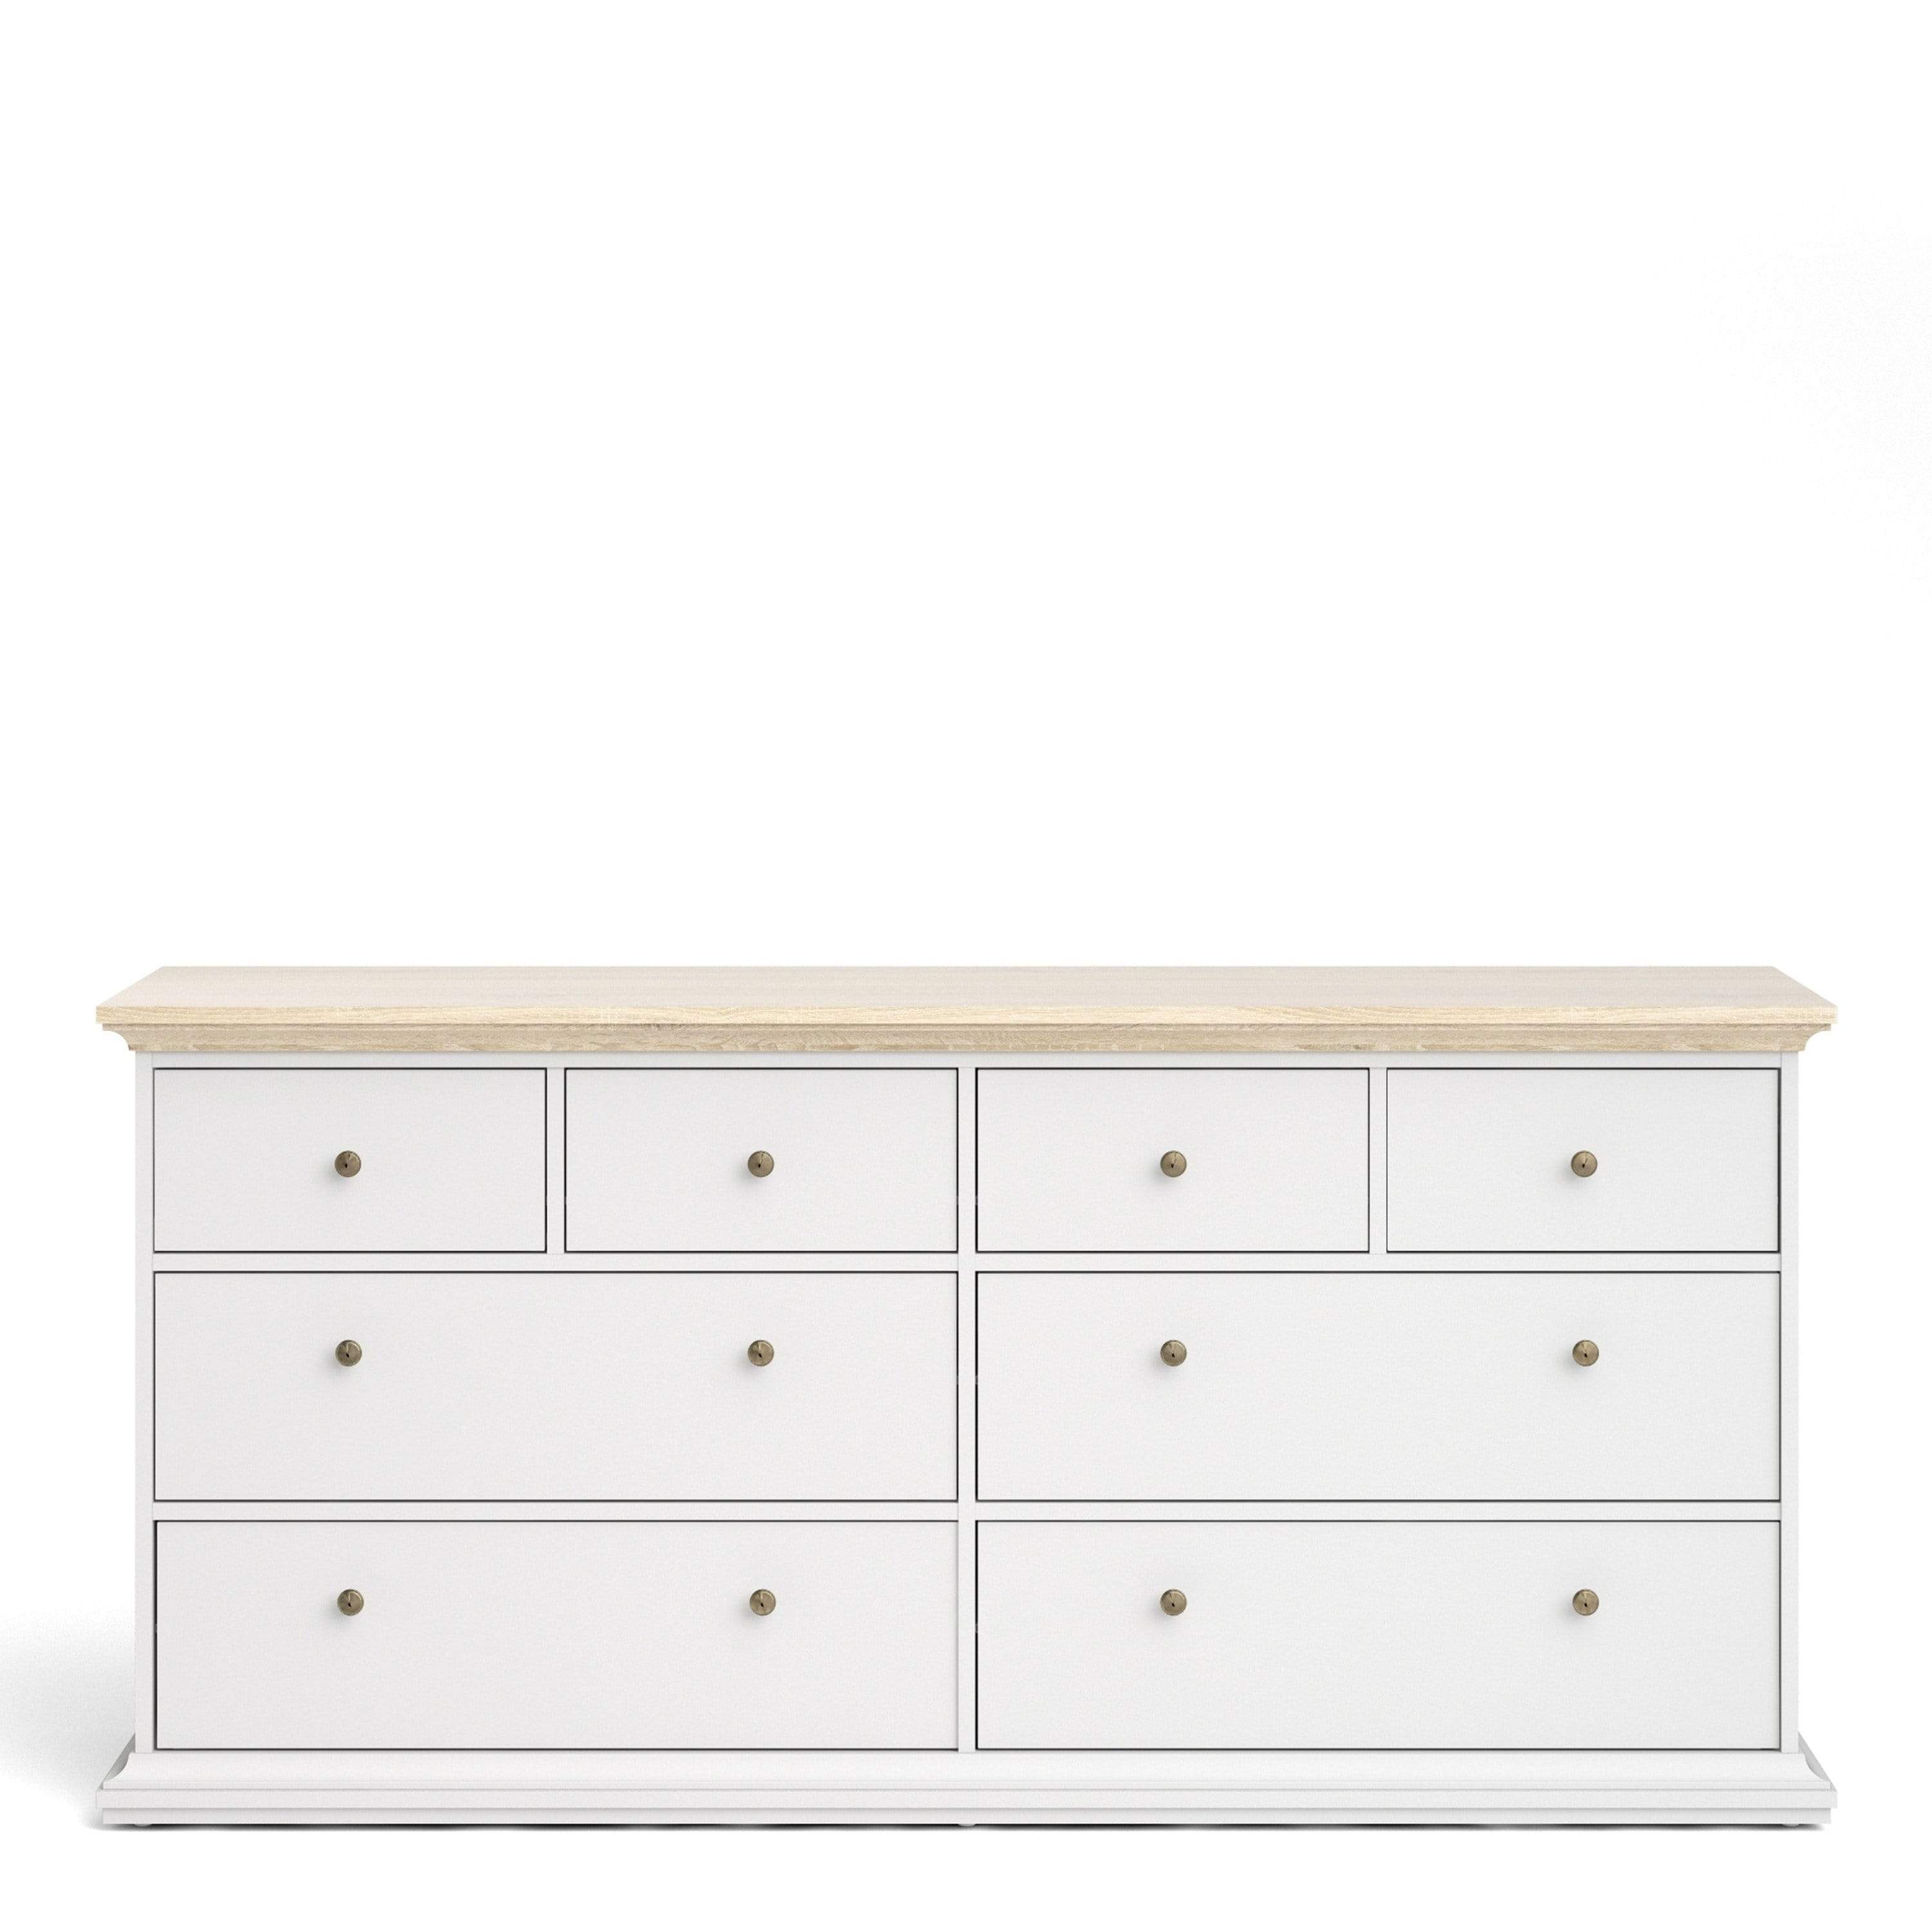 FTG Chest Of Drawers Paris Chest of 8 Drawers in White and Oak Bed Kings